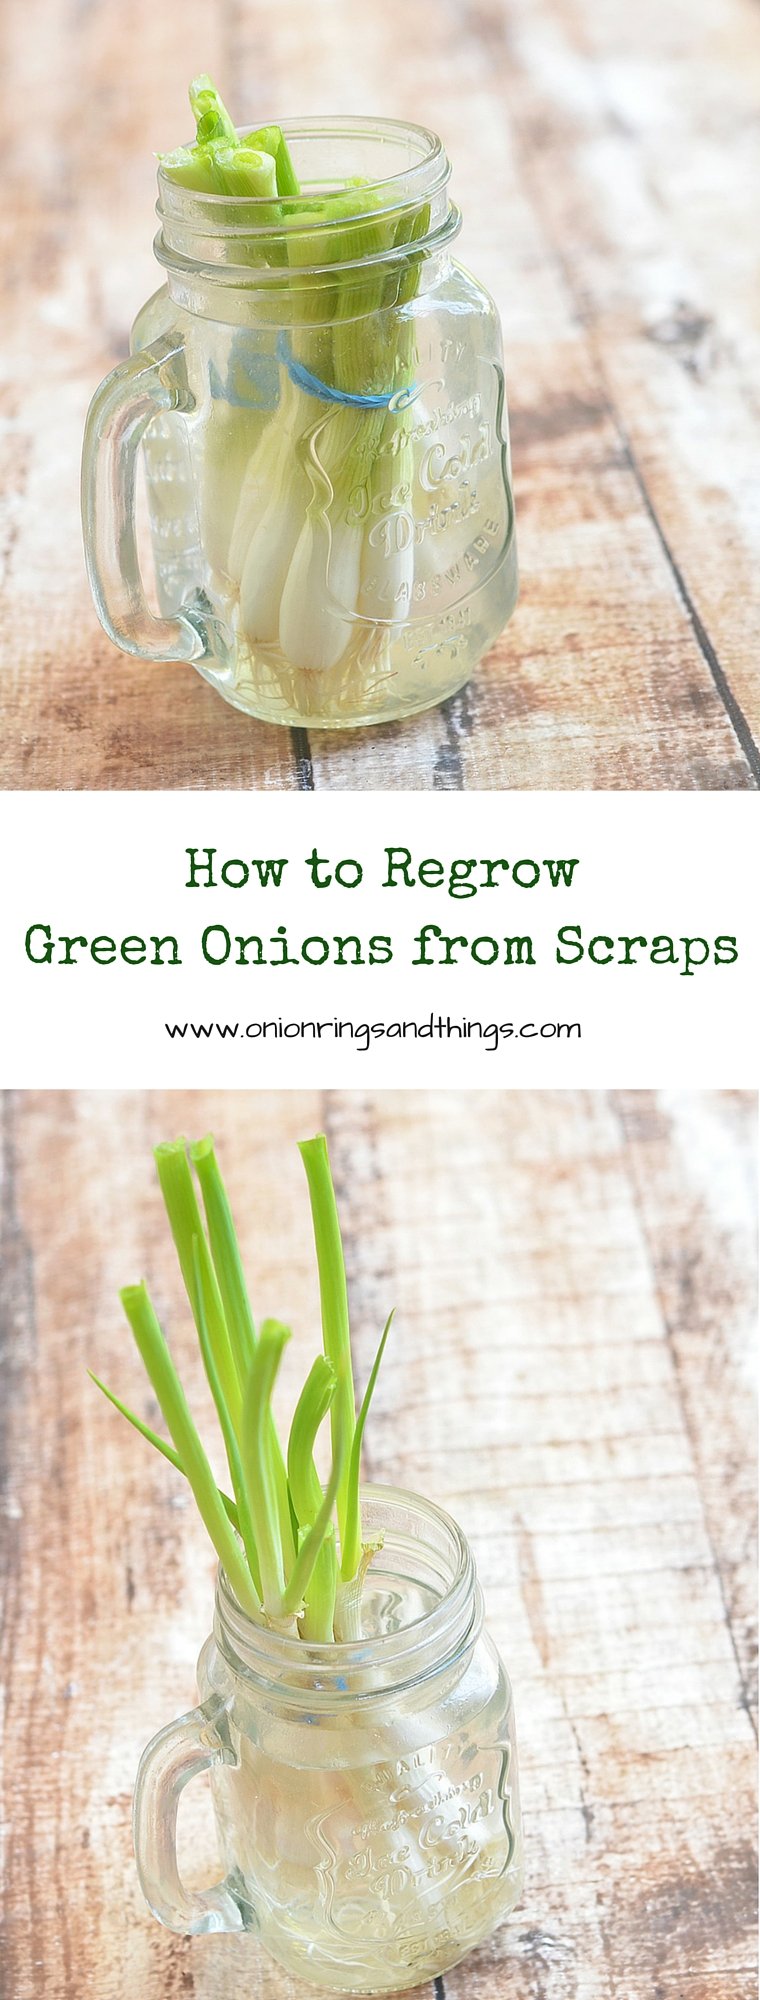 How to Regrow Green Onions from Scraps